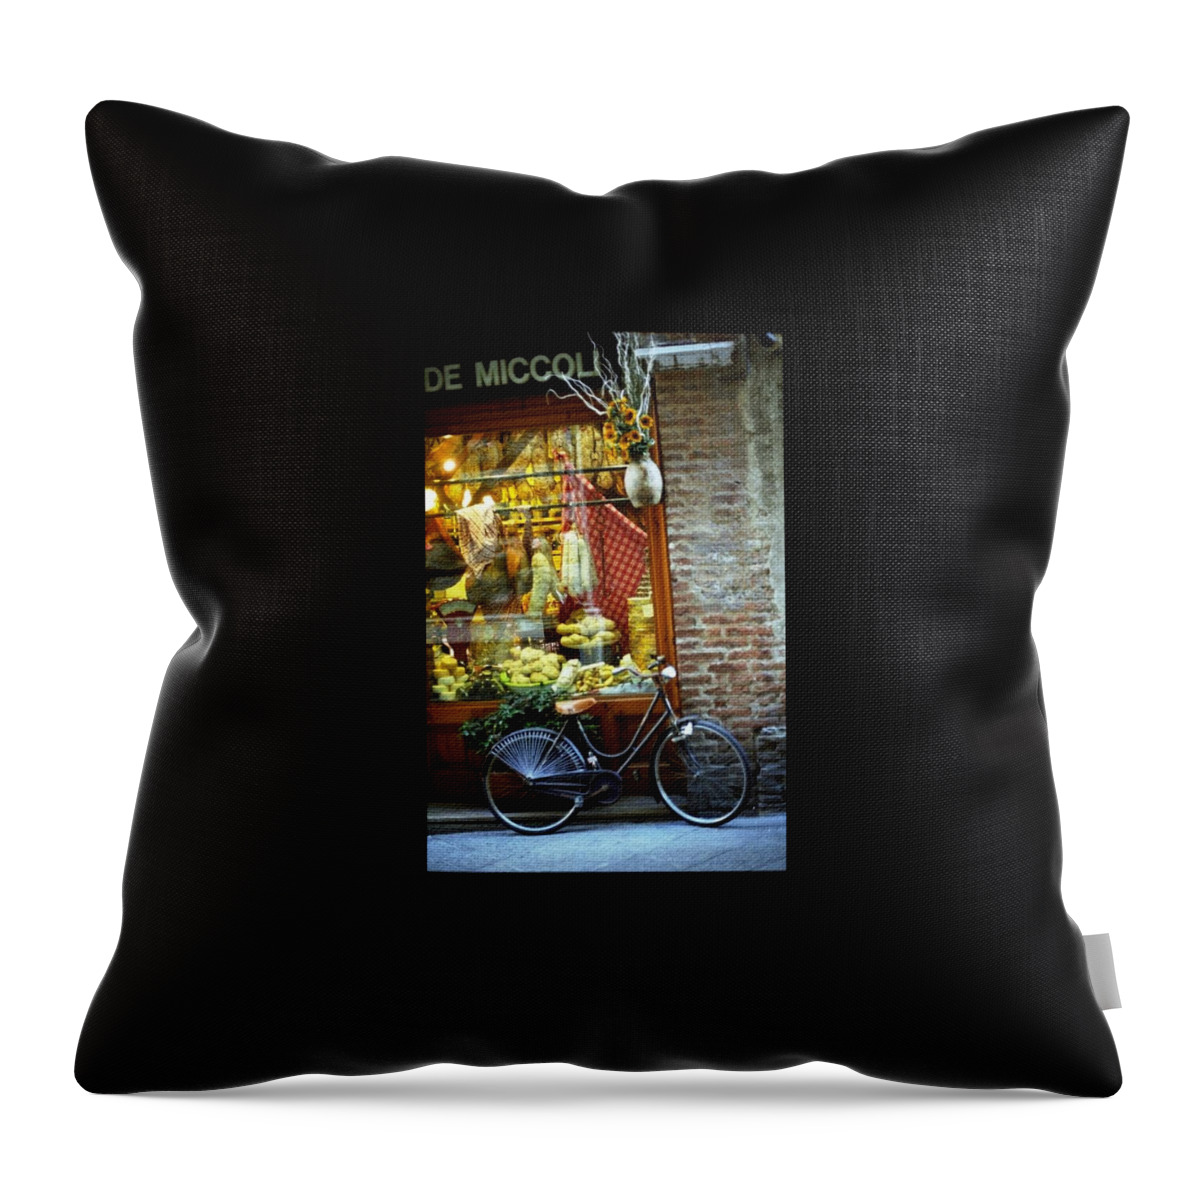  Throw Pillow featuring the photograph Bike in Sienna by Susie Rieple